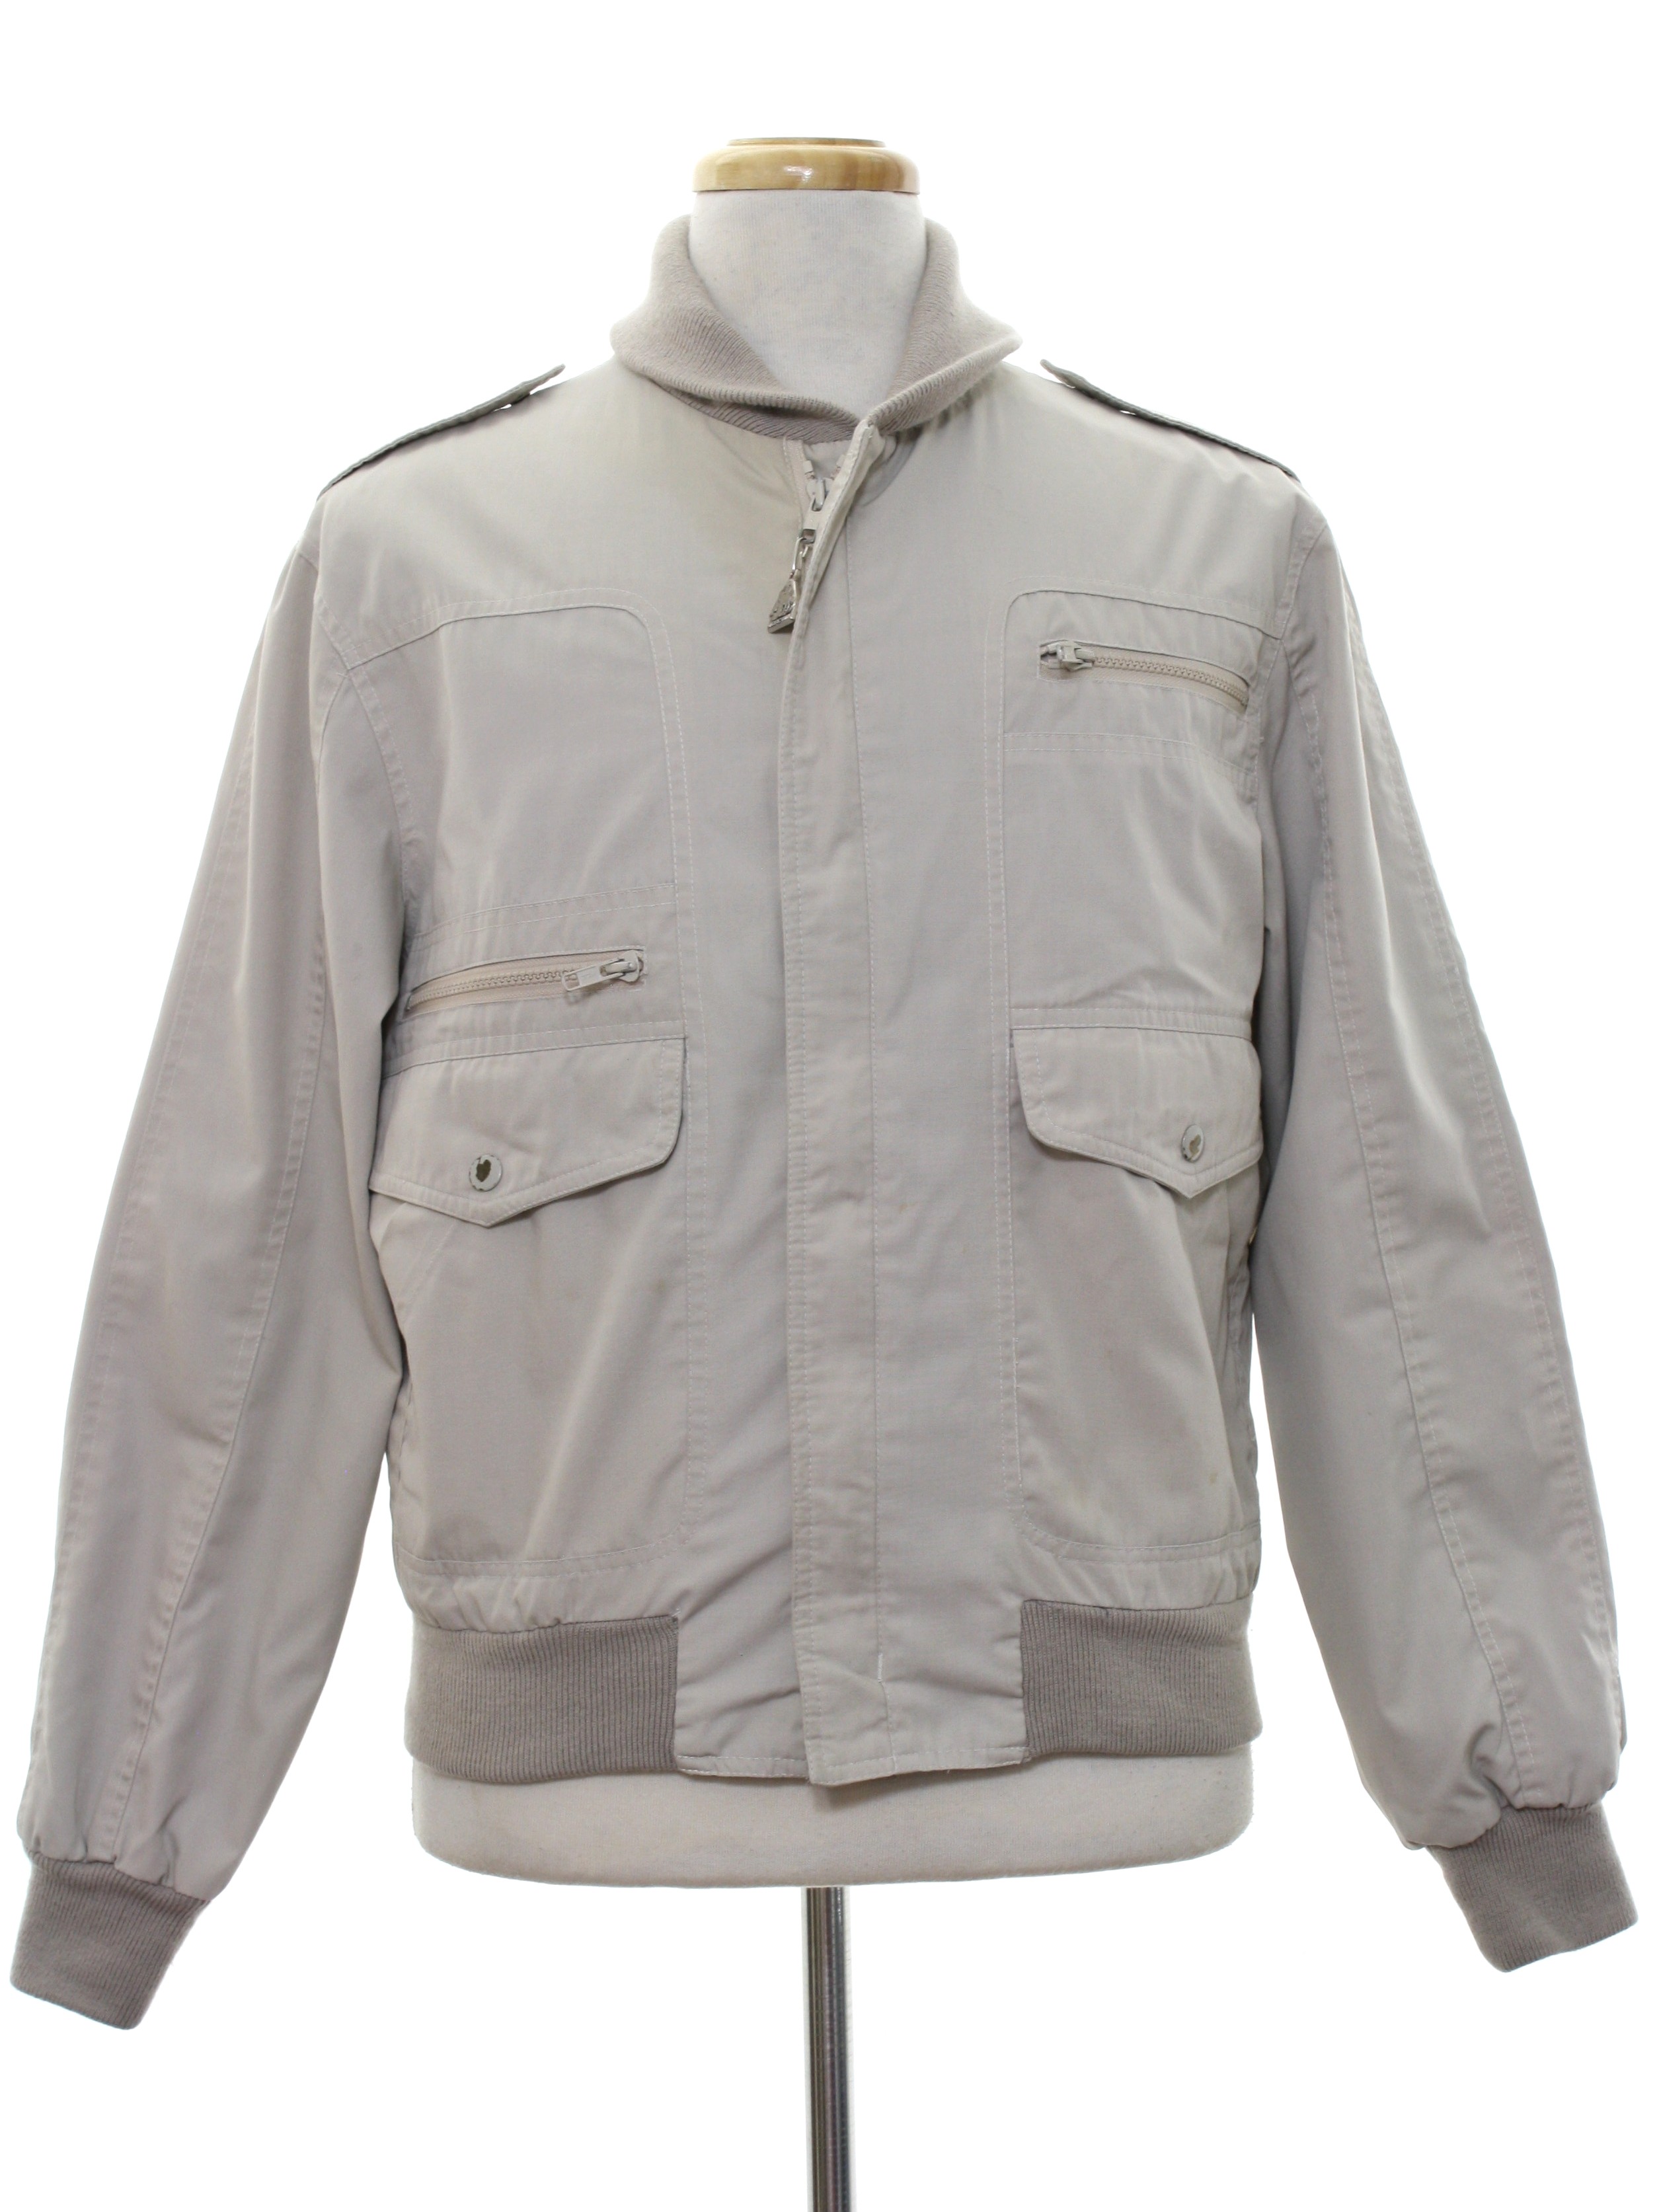 1980's Vintage Pacific Trail Sportswear Jacket: 80s -Pacific Trail ...